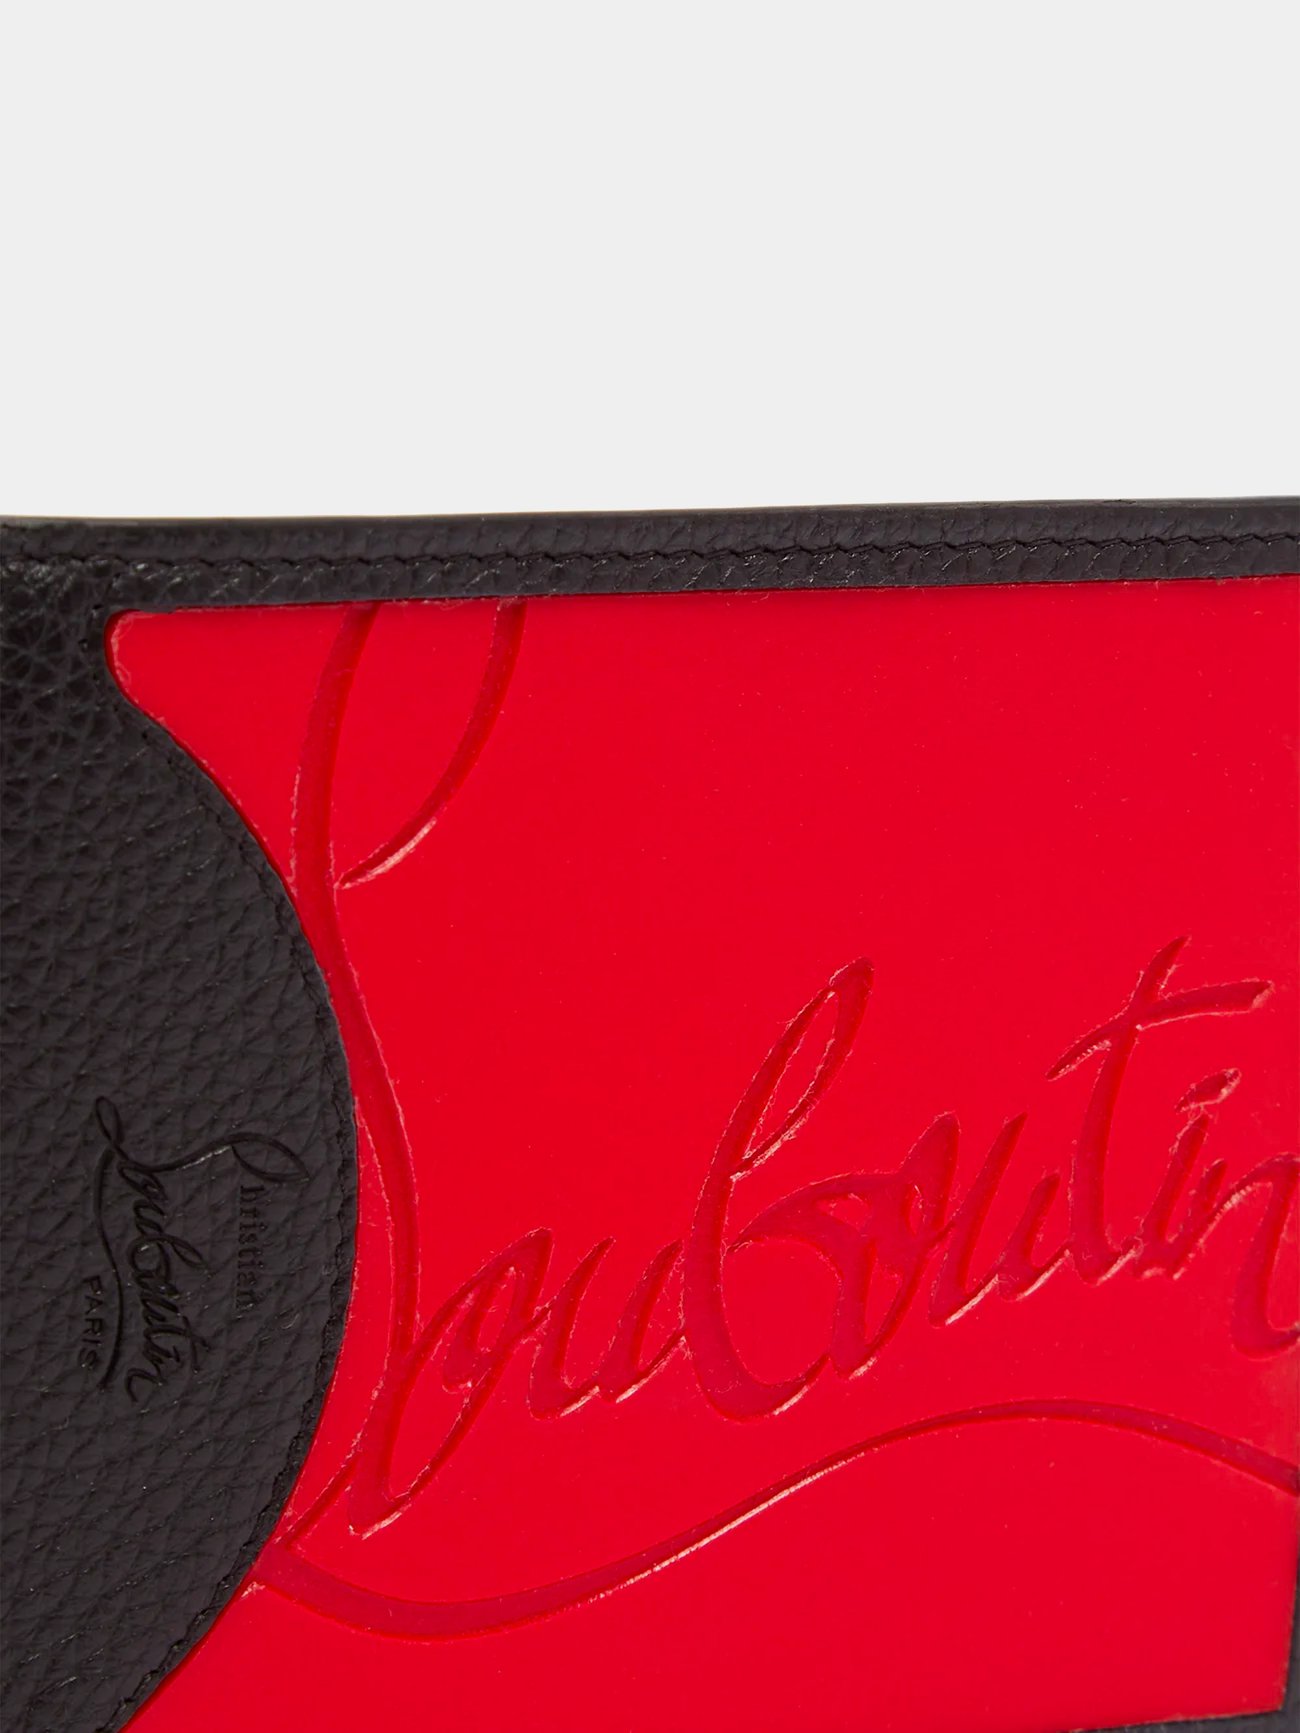 Christian Louboutin Multicolor Printed Leather Coolcoin Bifold